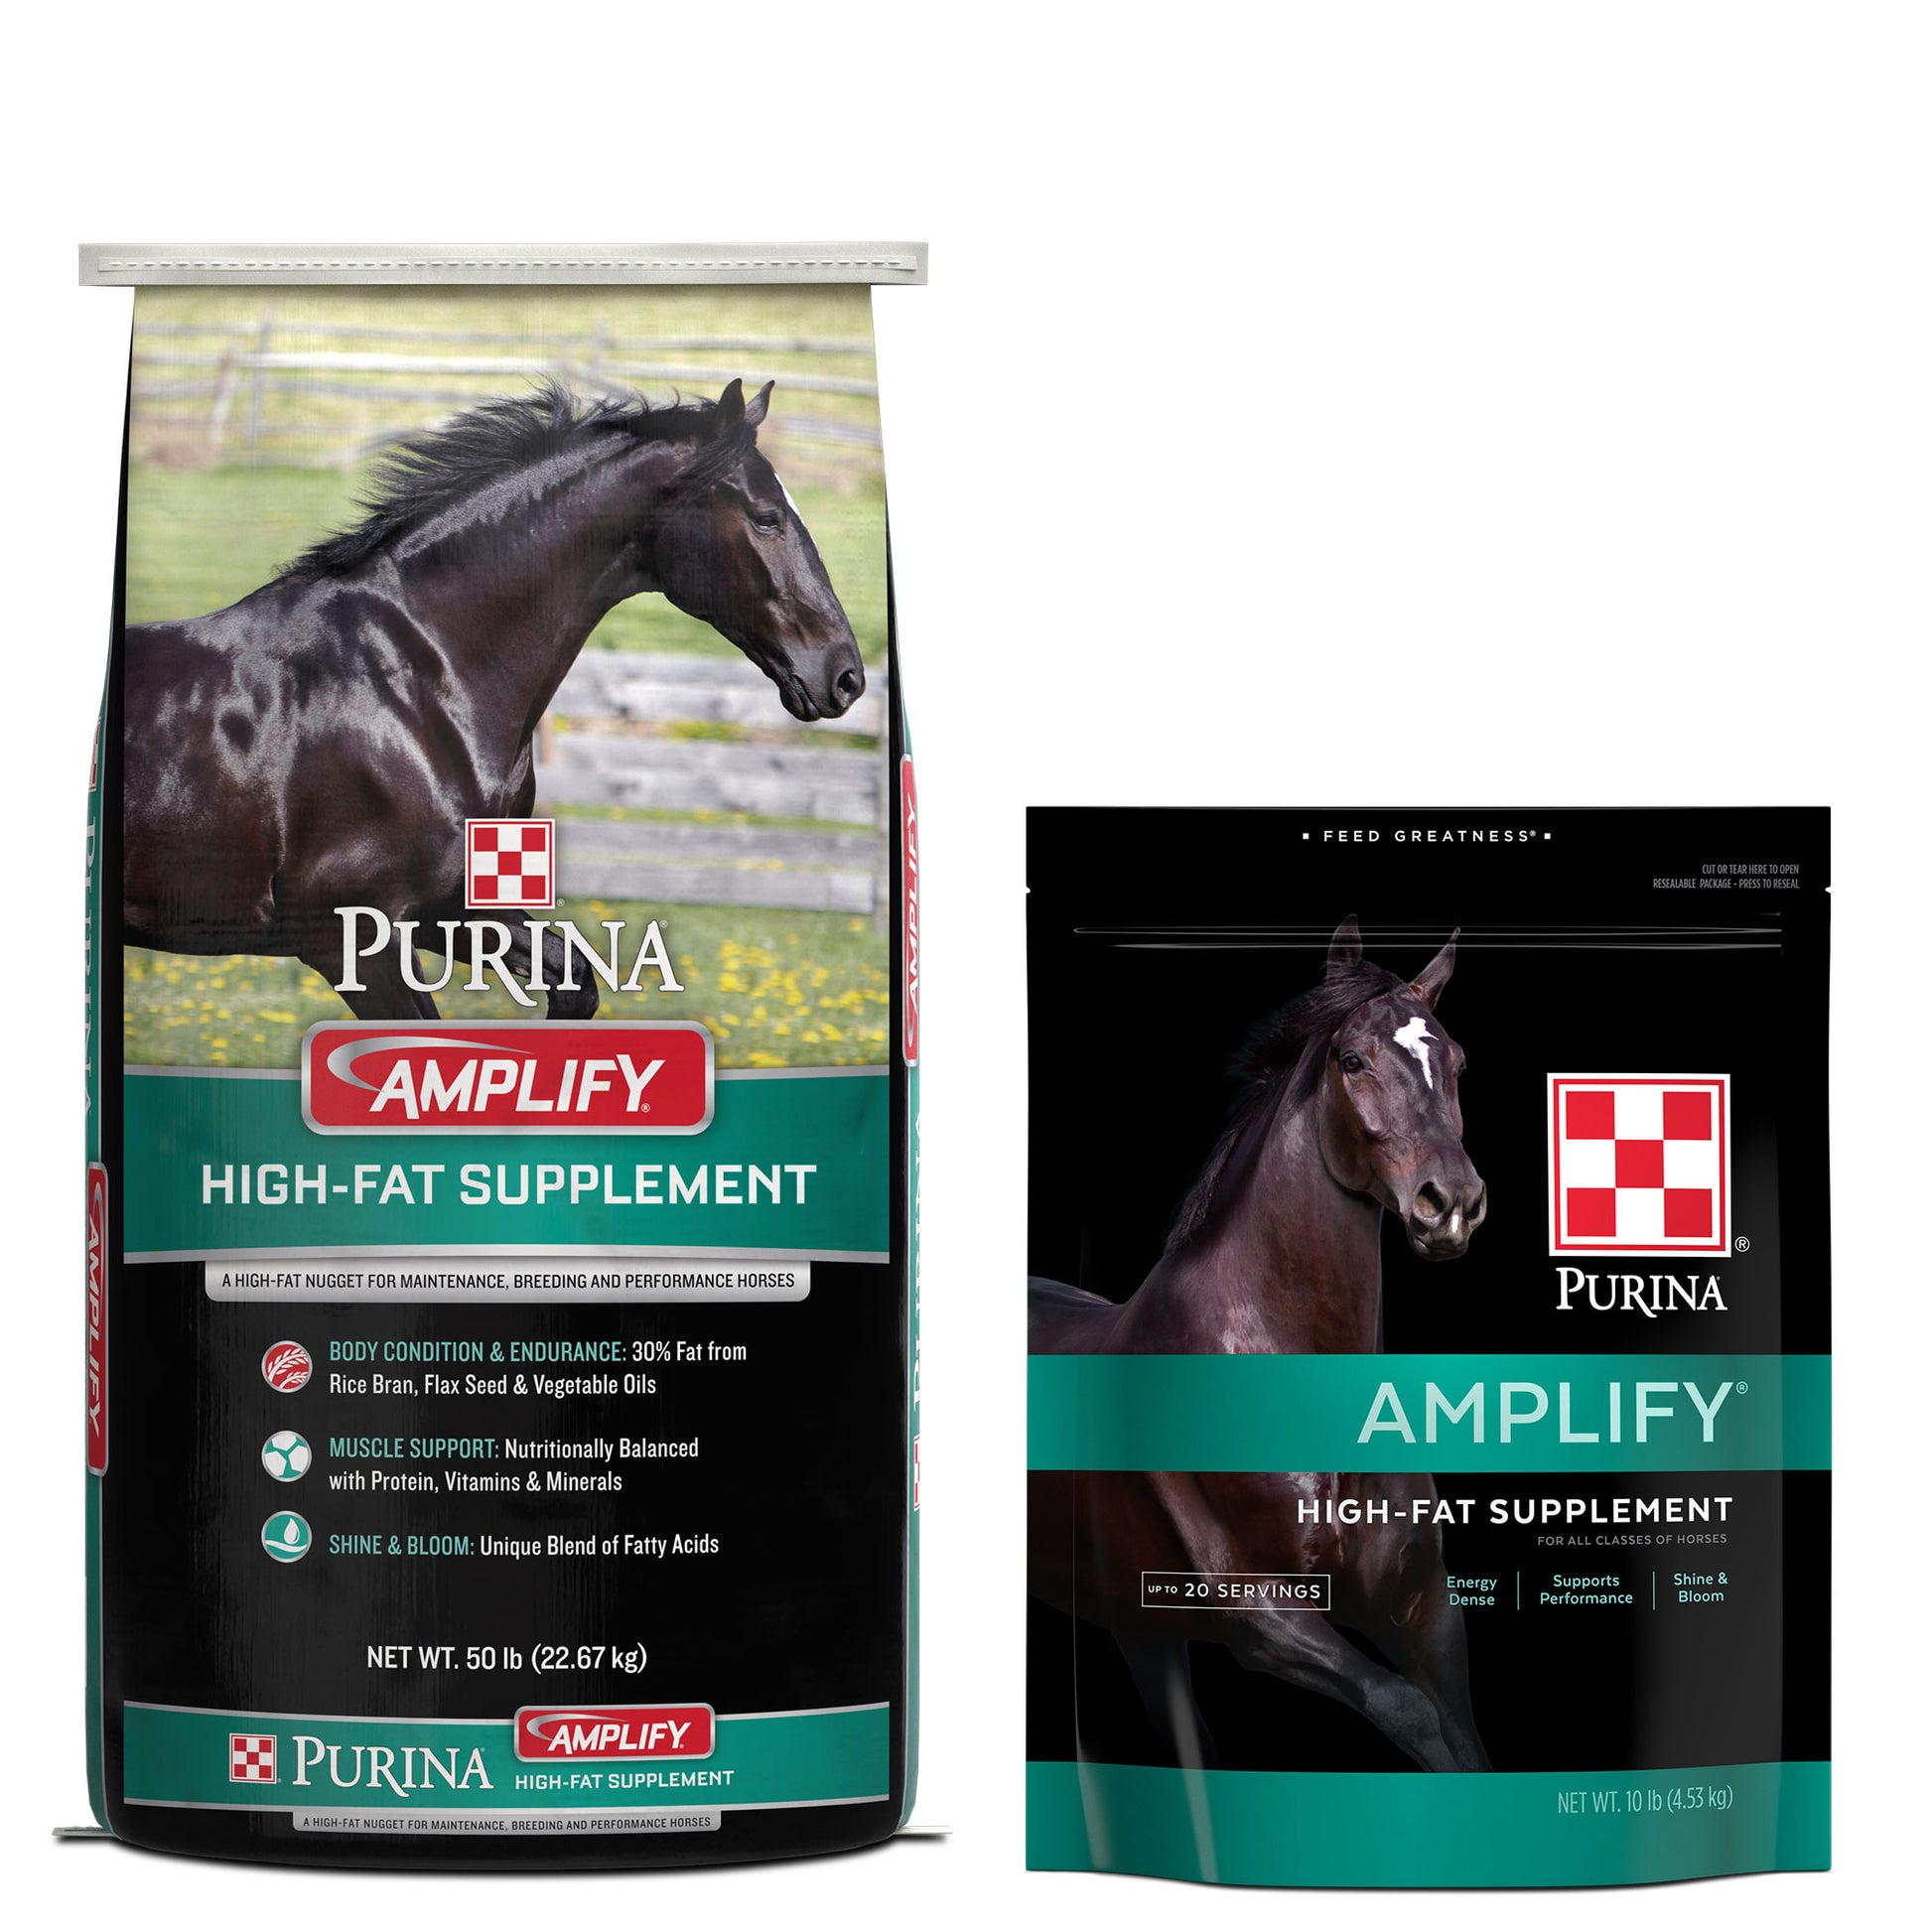 Purina Amplify 50 Pound bag and 10 Pound Bag grouped together